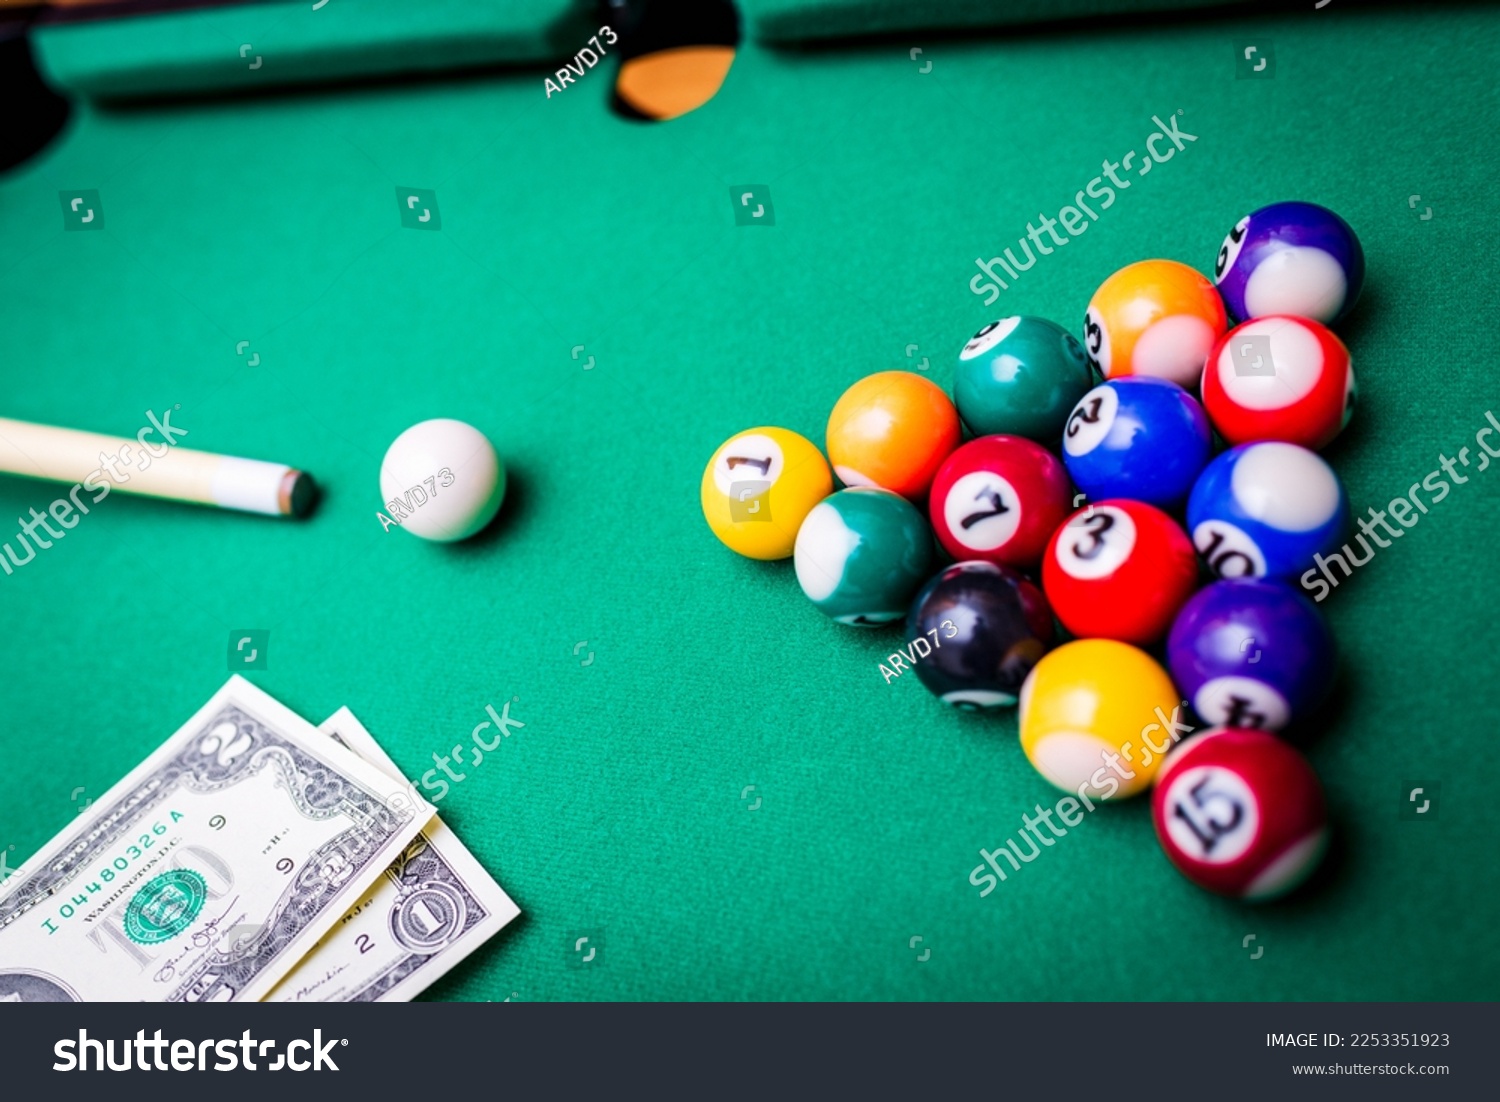 Gambling ardor game.Money and multicolored billiard balls with numbers.Dollar paper banknotes on the game table.Selective focus. #2253351923